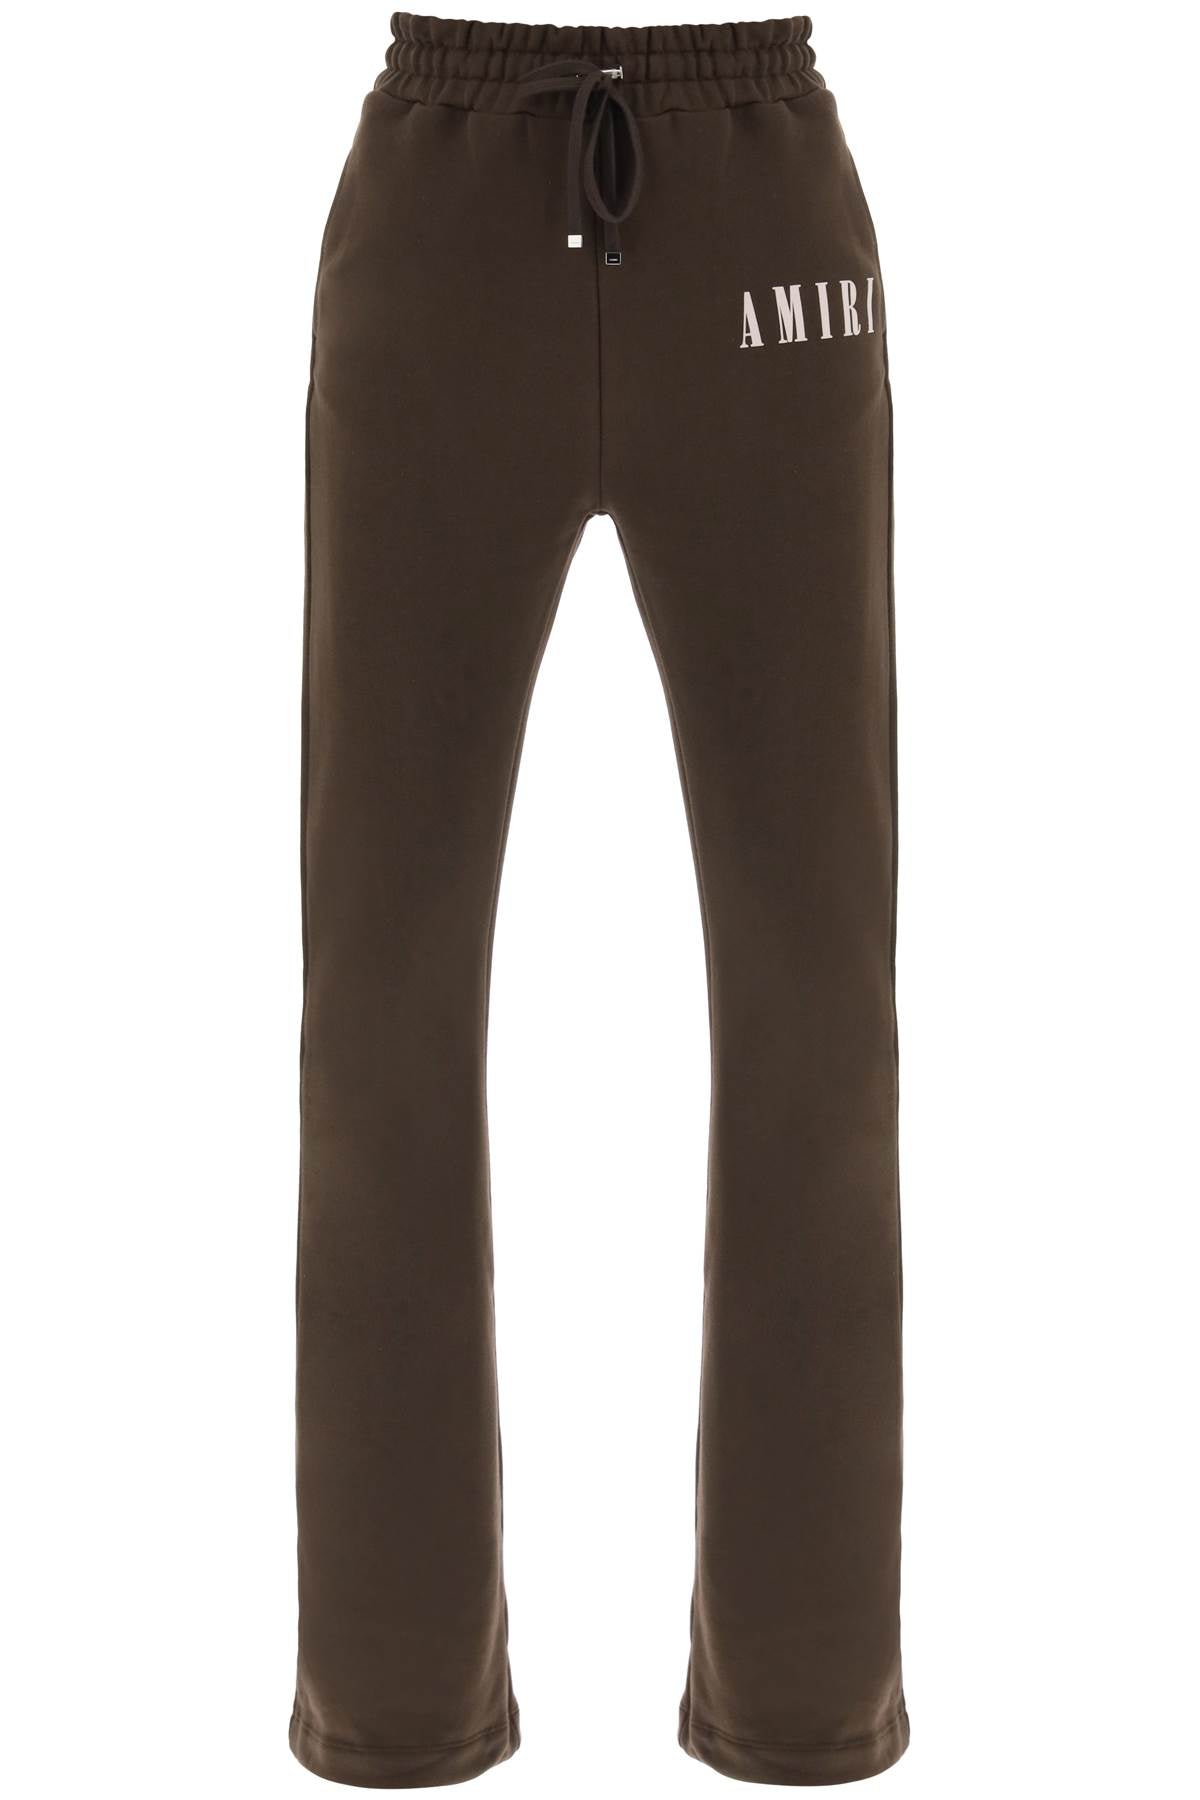 Shop Amiri Brown Joggers With Core Logo For Women